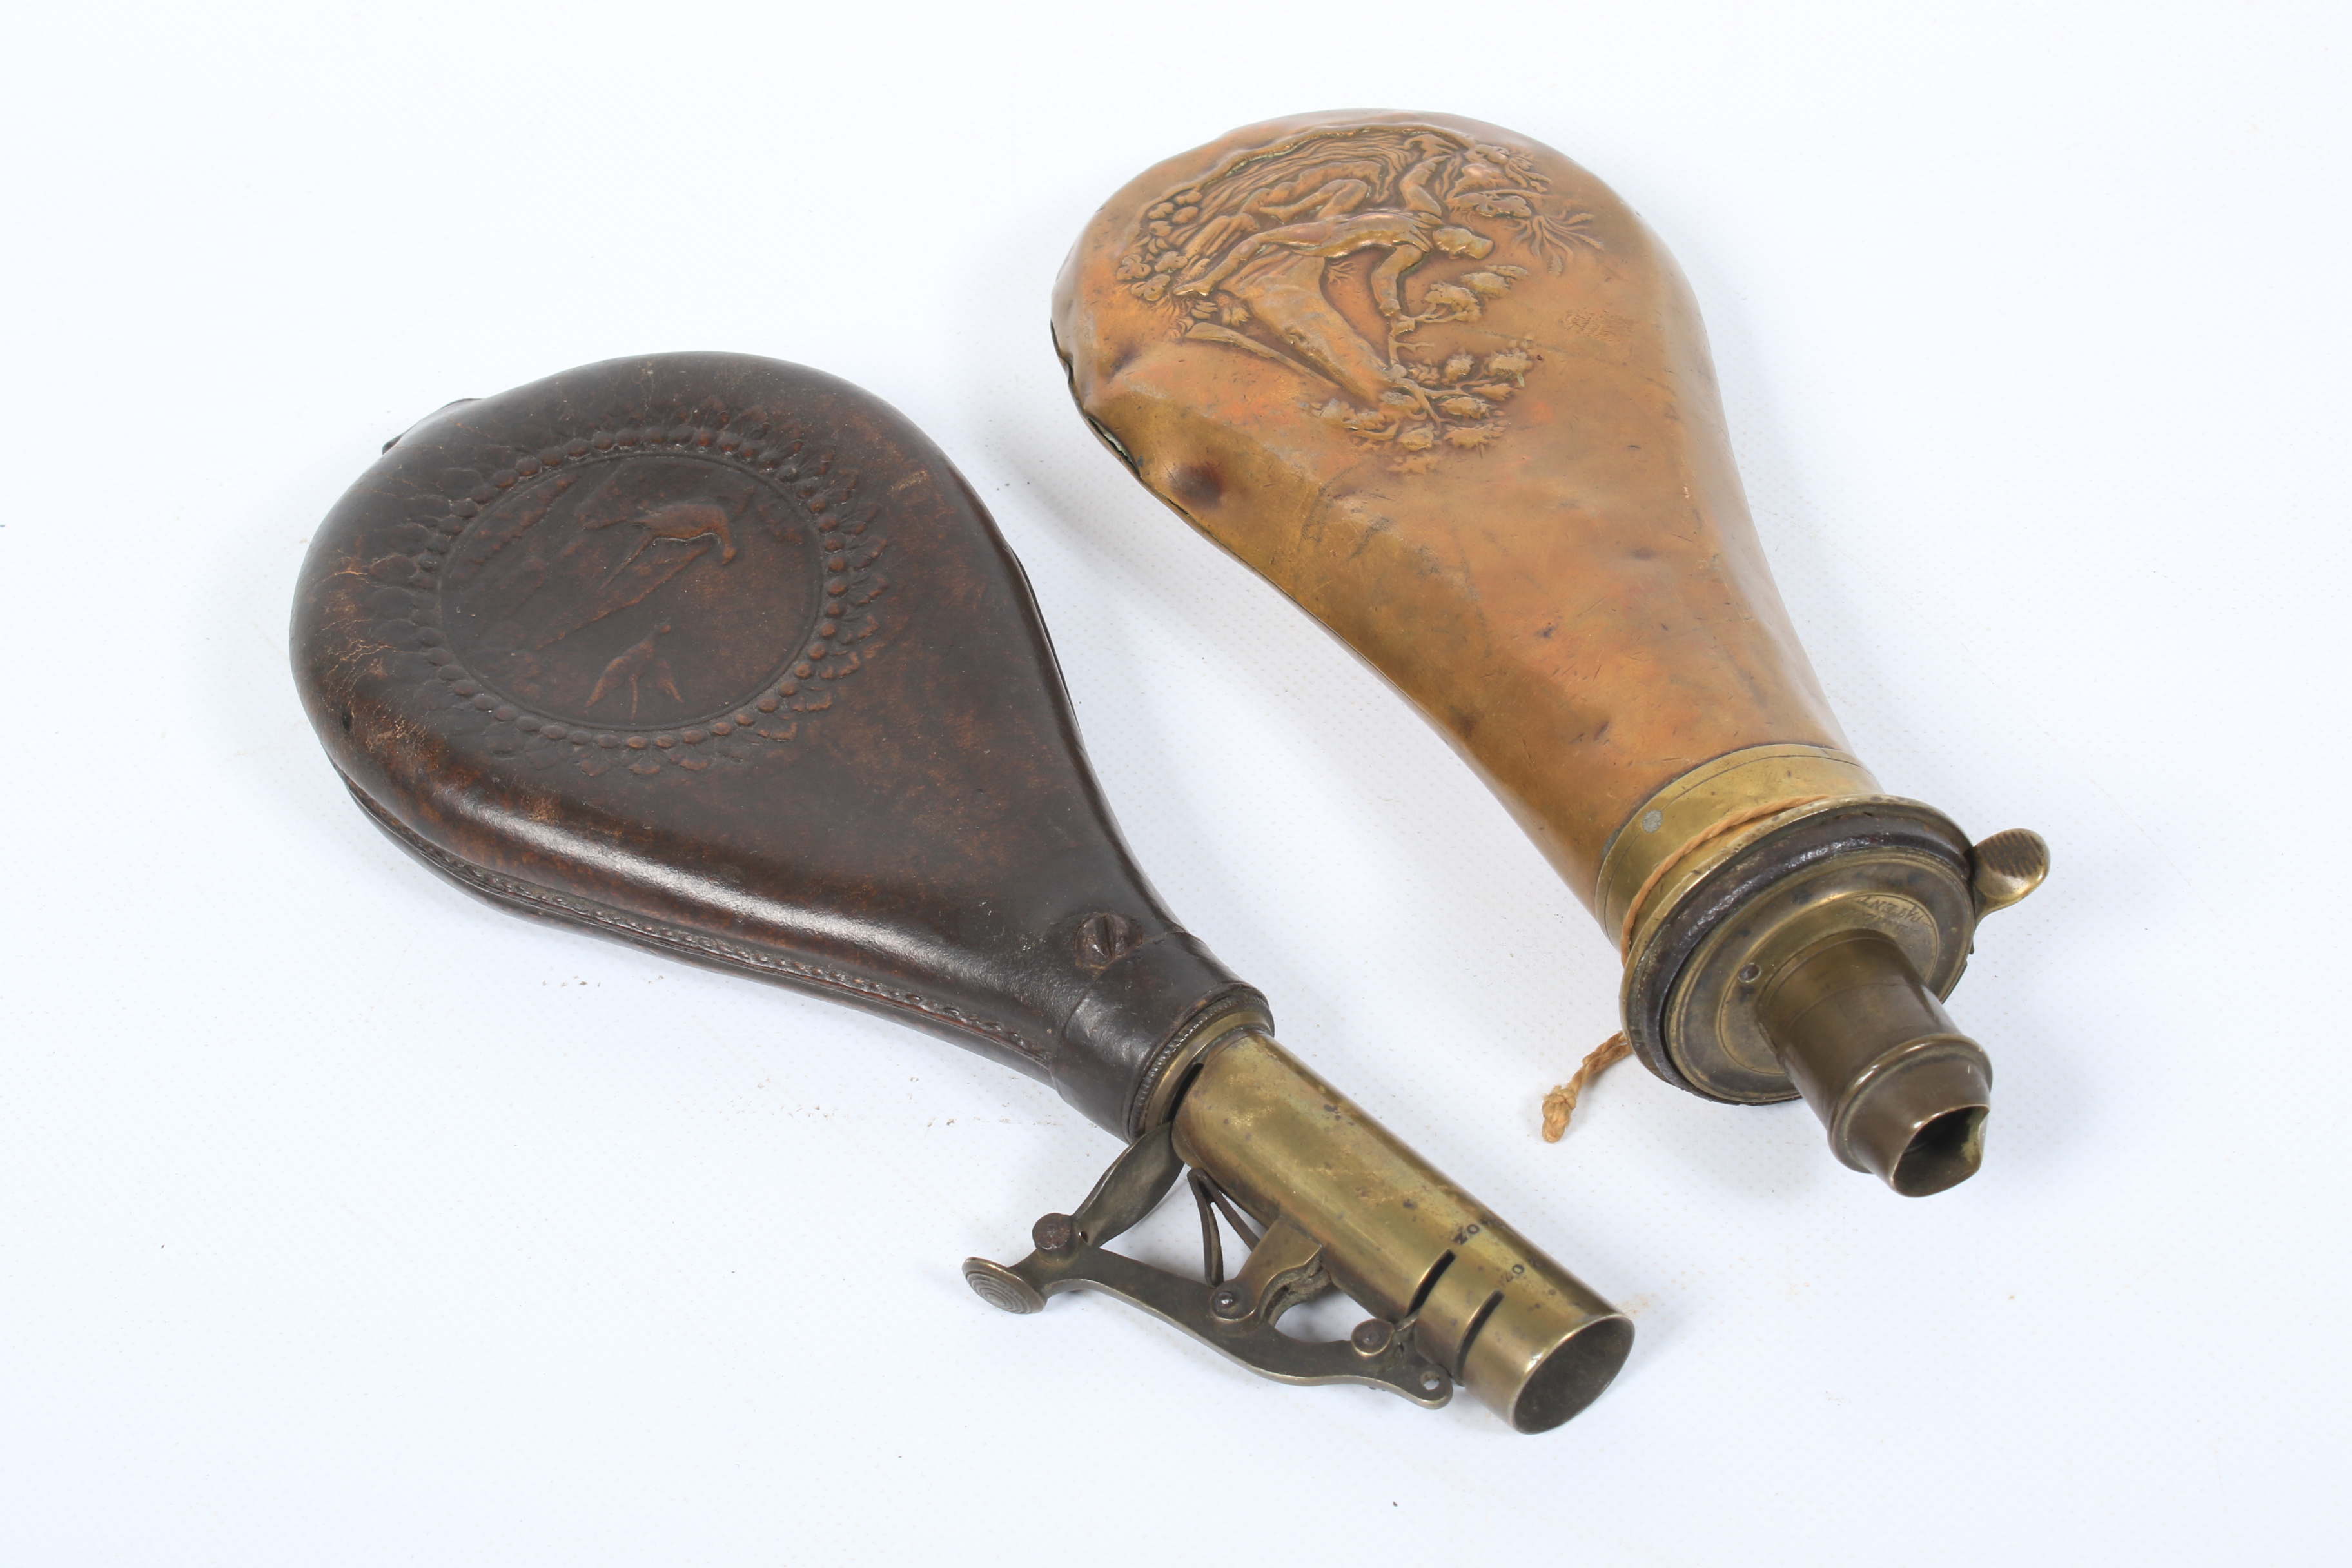 A brass powder flask and a leather shot flask.